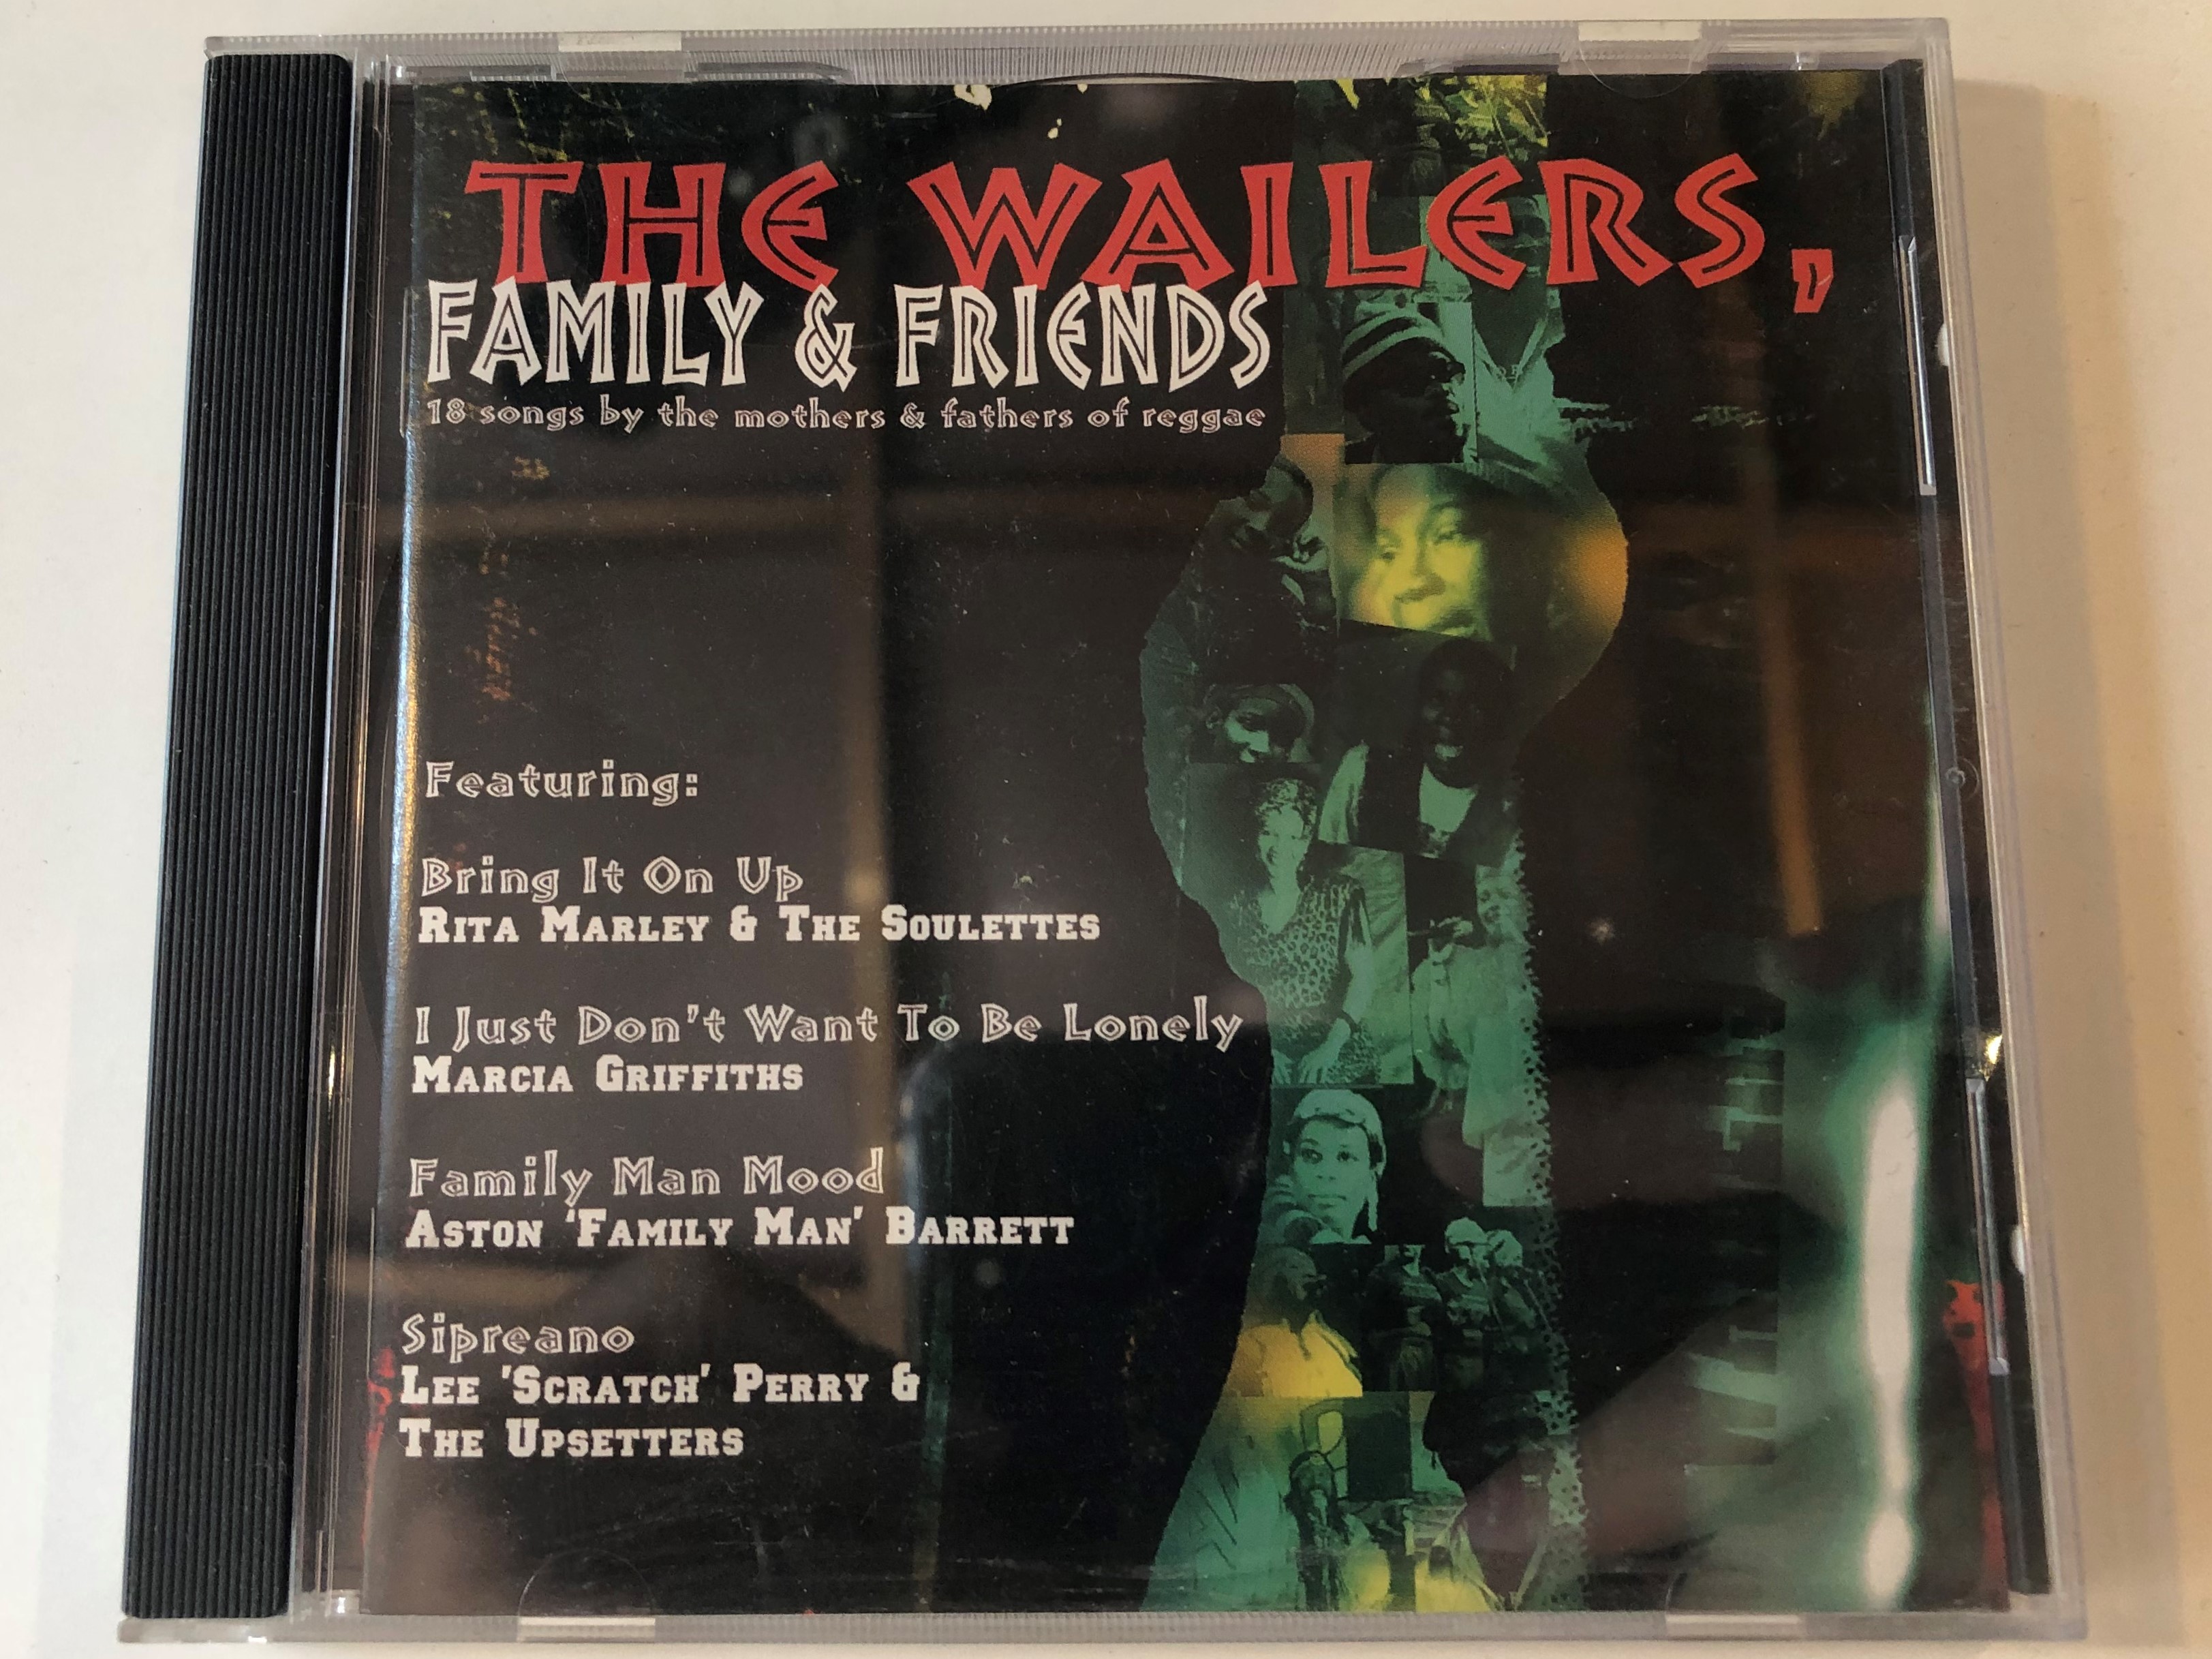 the-wailers-family-friends-18-songs-by-the-mothers-fathers-of-reggac-featuring-bring-it-on-up-rita-marley-the-soulettes-i-just-dont-want-to-be-lonely-marcia-griffiths-family-man-m-1-.jpg